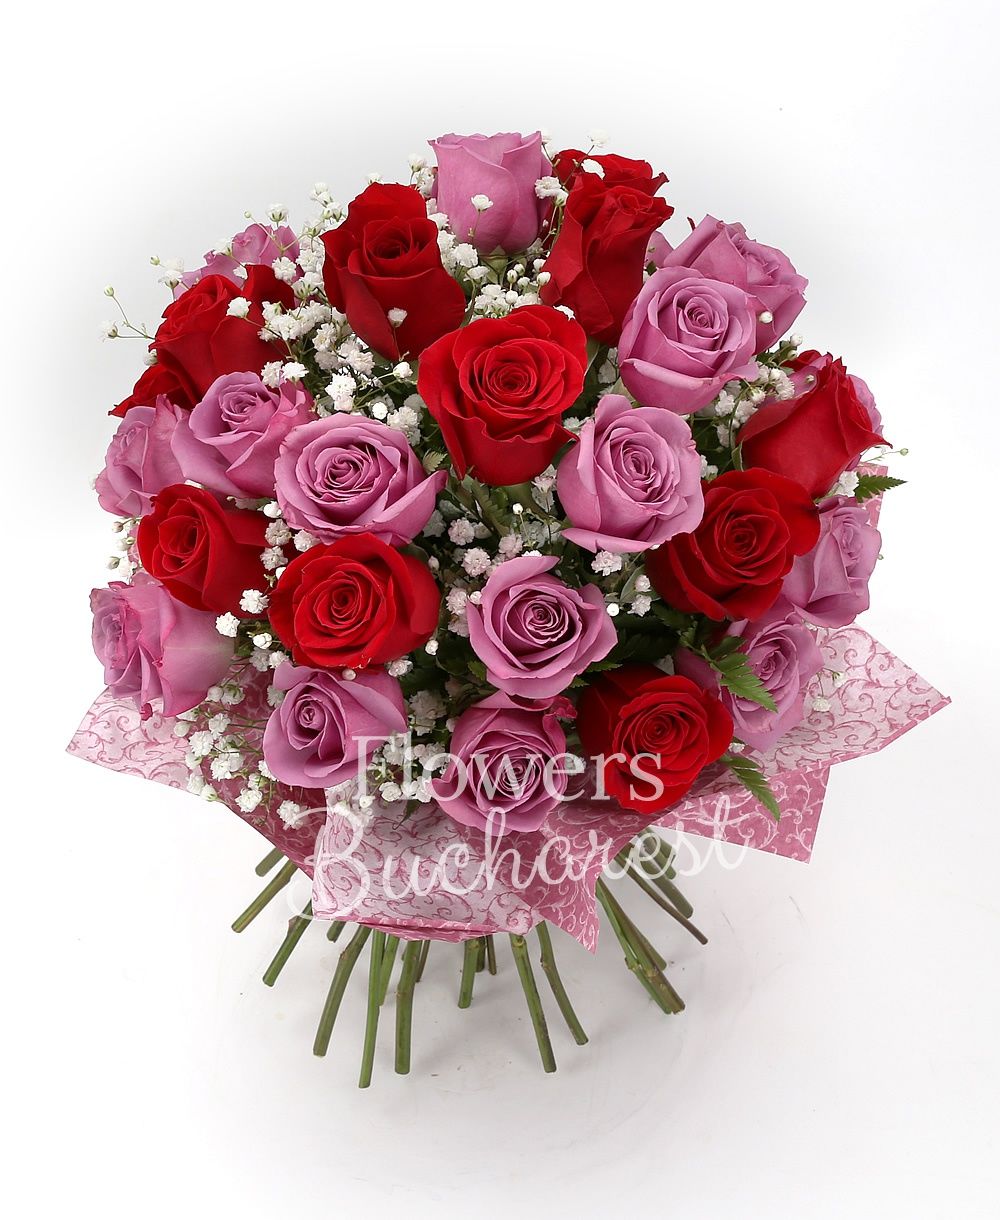 13 red roses, 15 pink roses, greenery